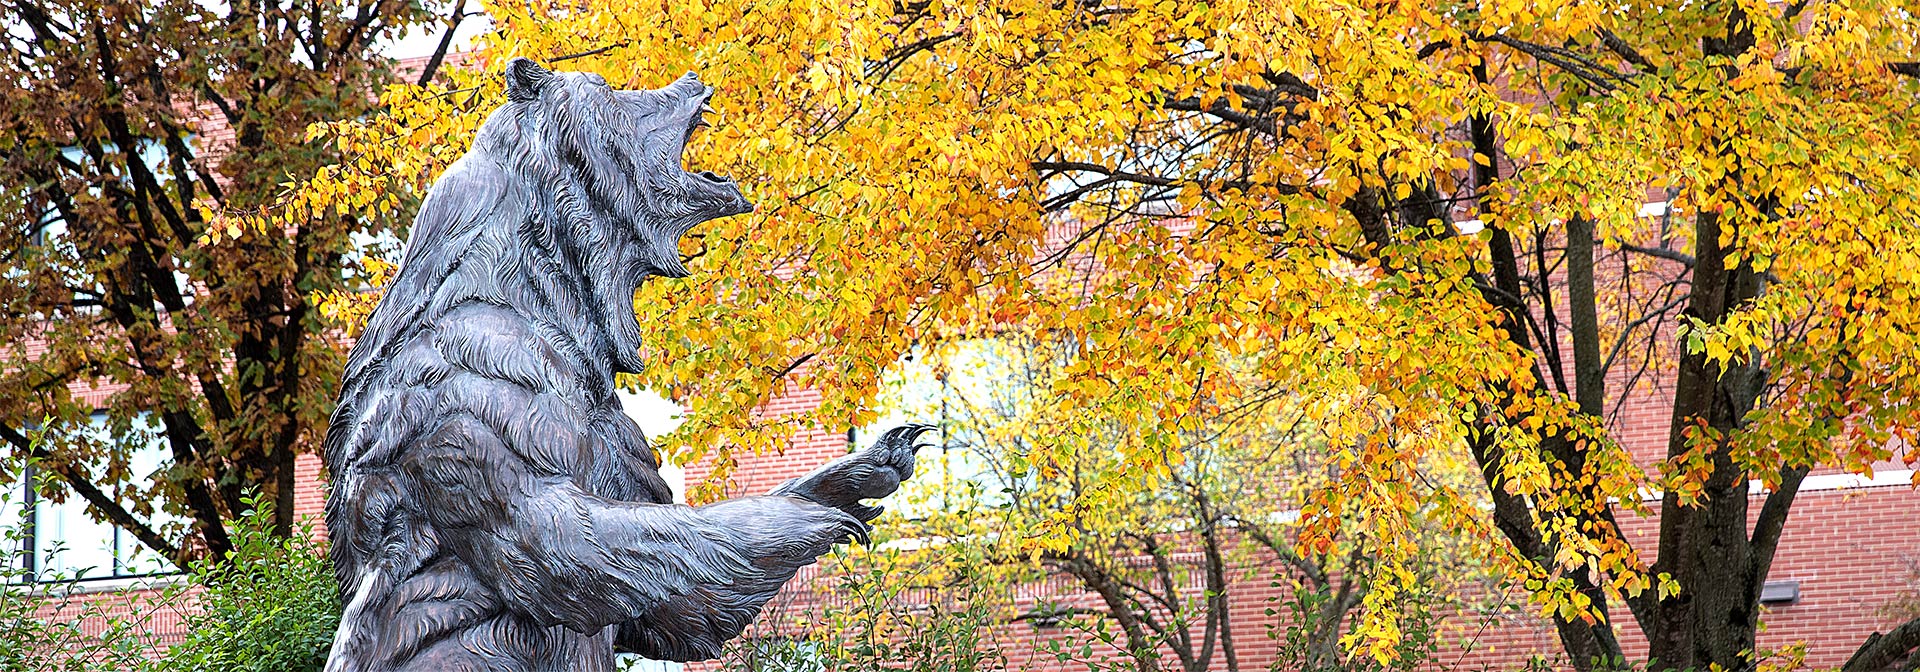 The grizzly statue with fall trees in the background